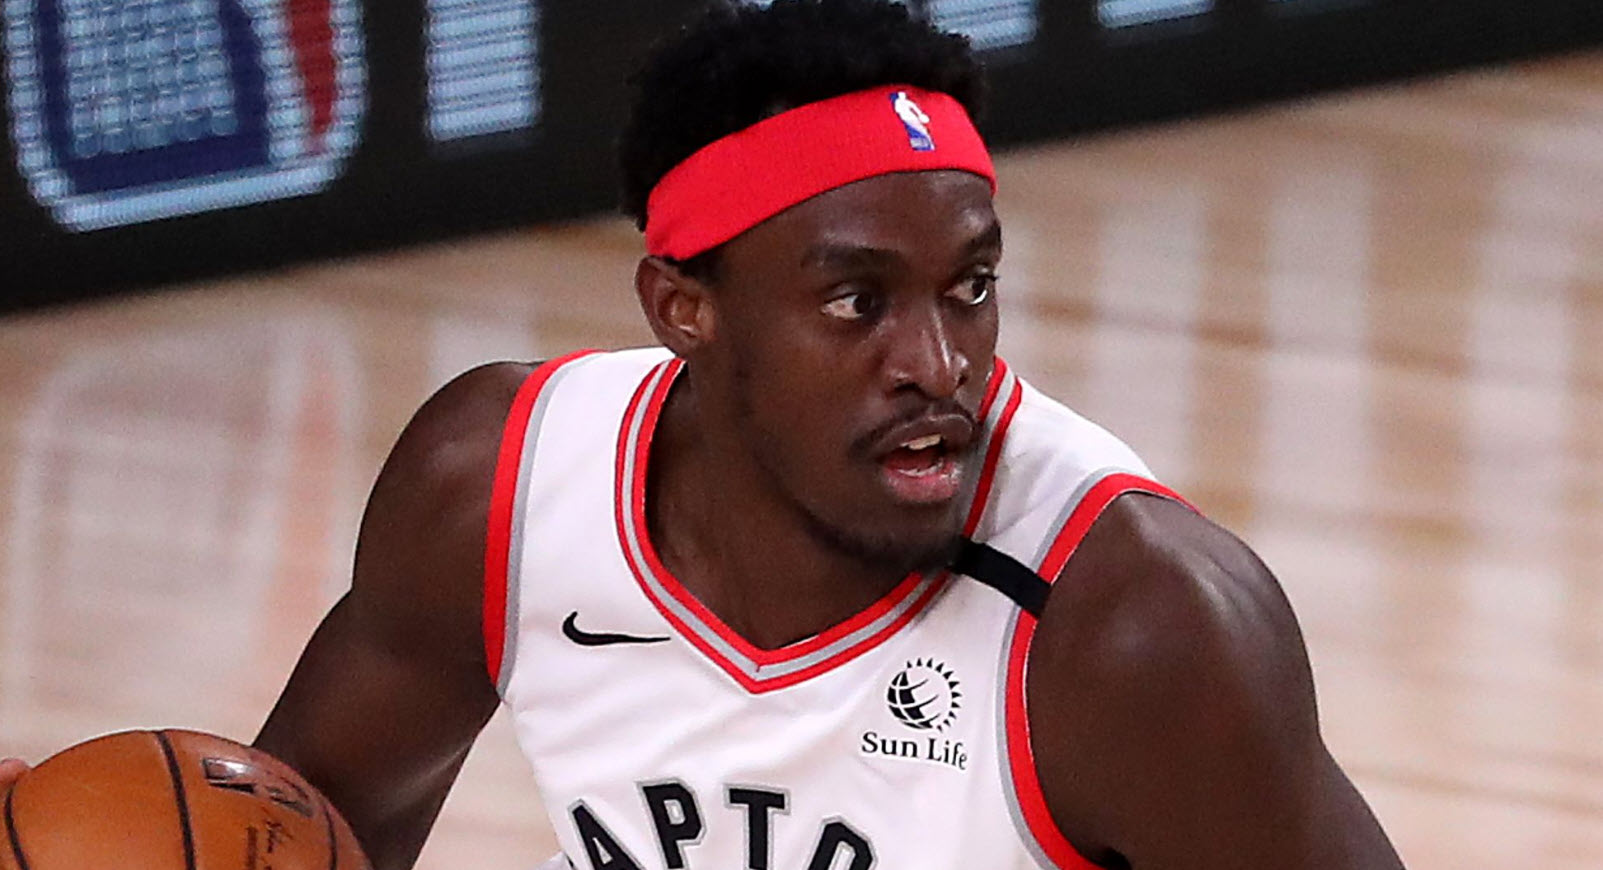 Let's take a moment to appreciate Pascal Siakam